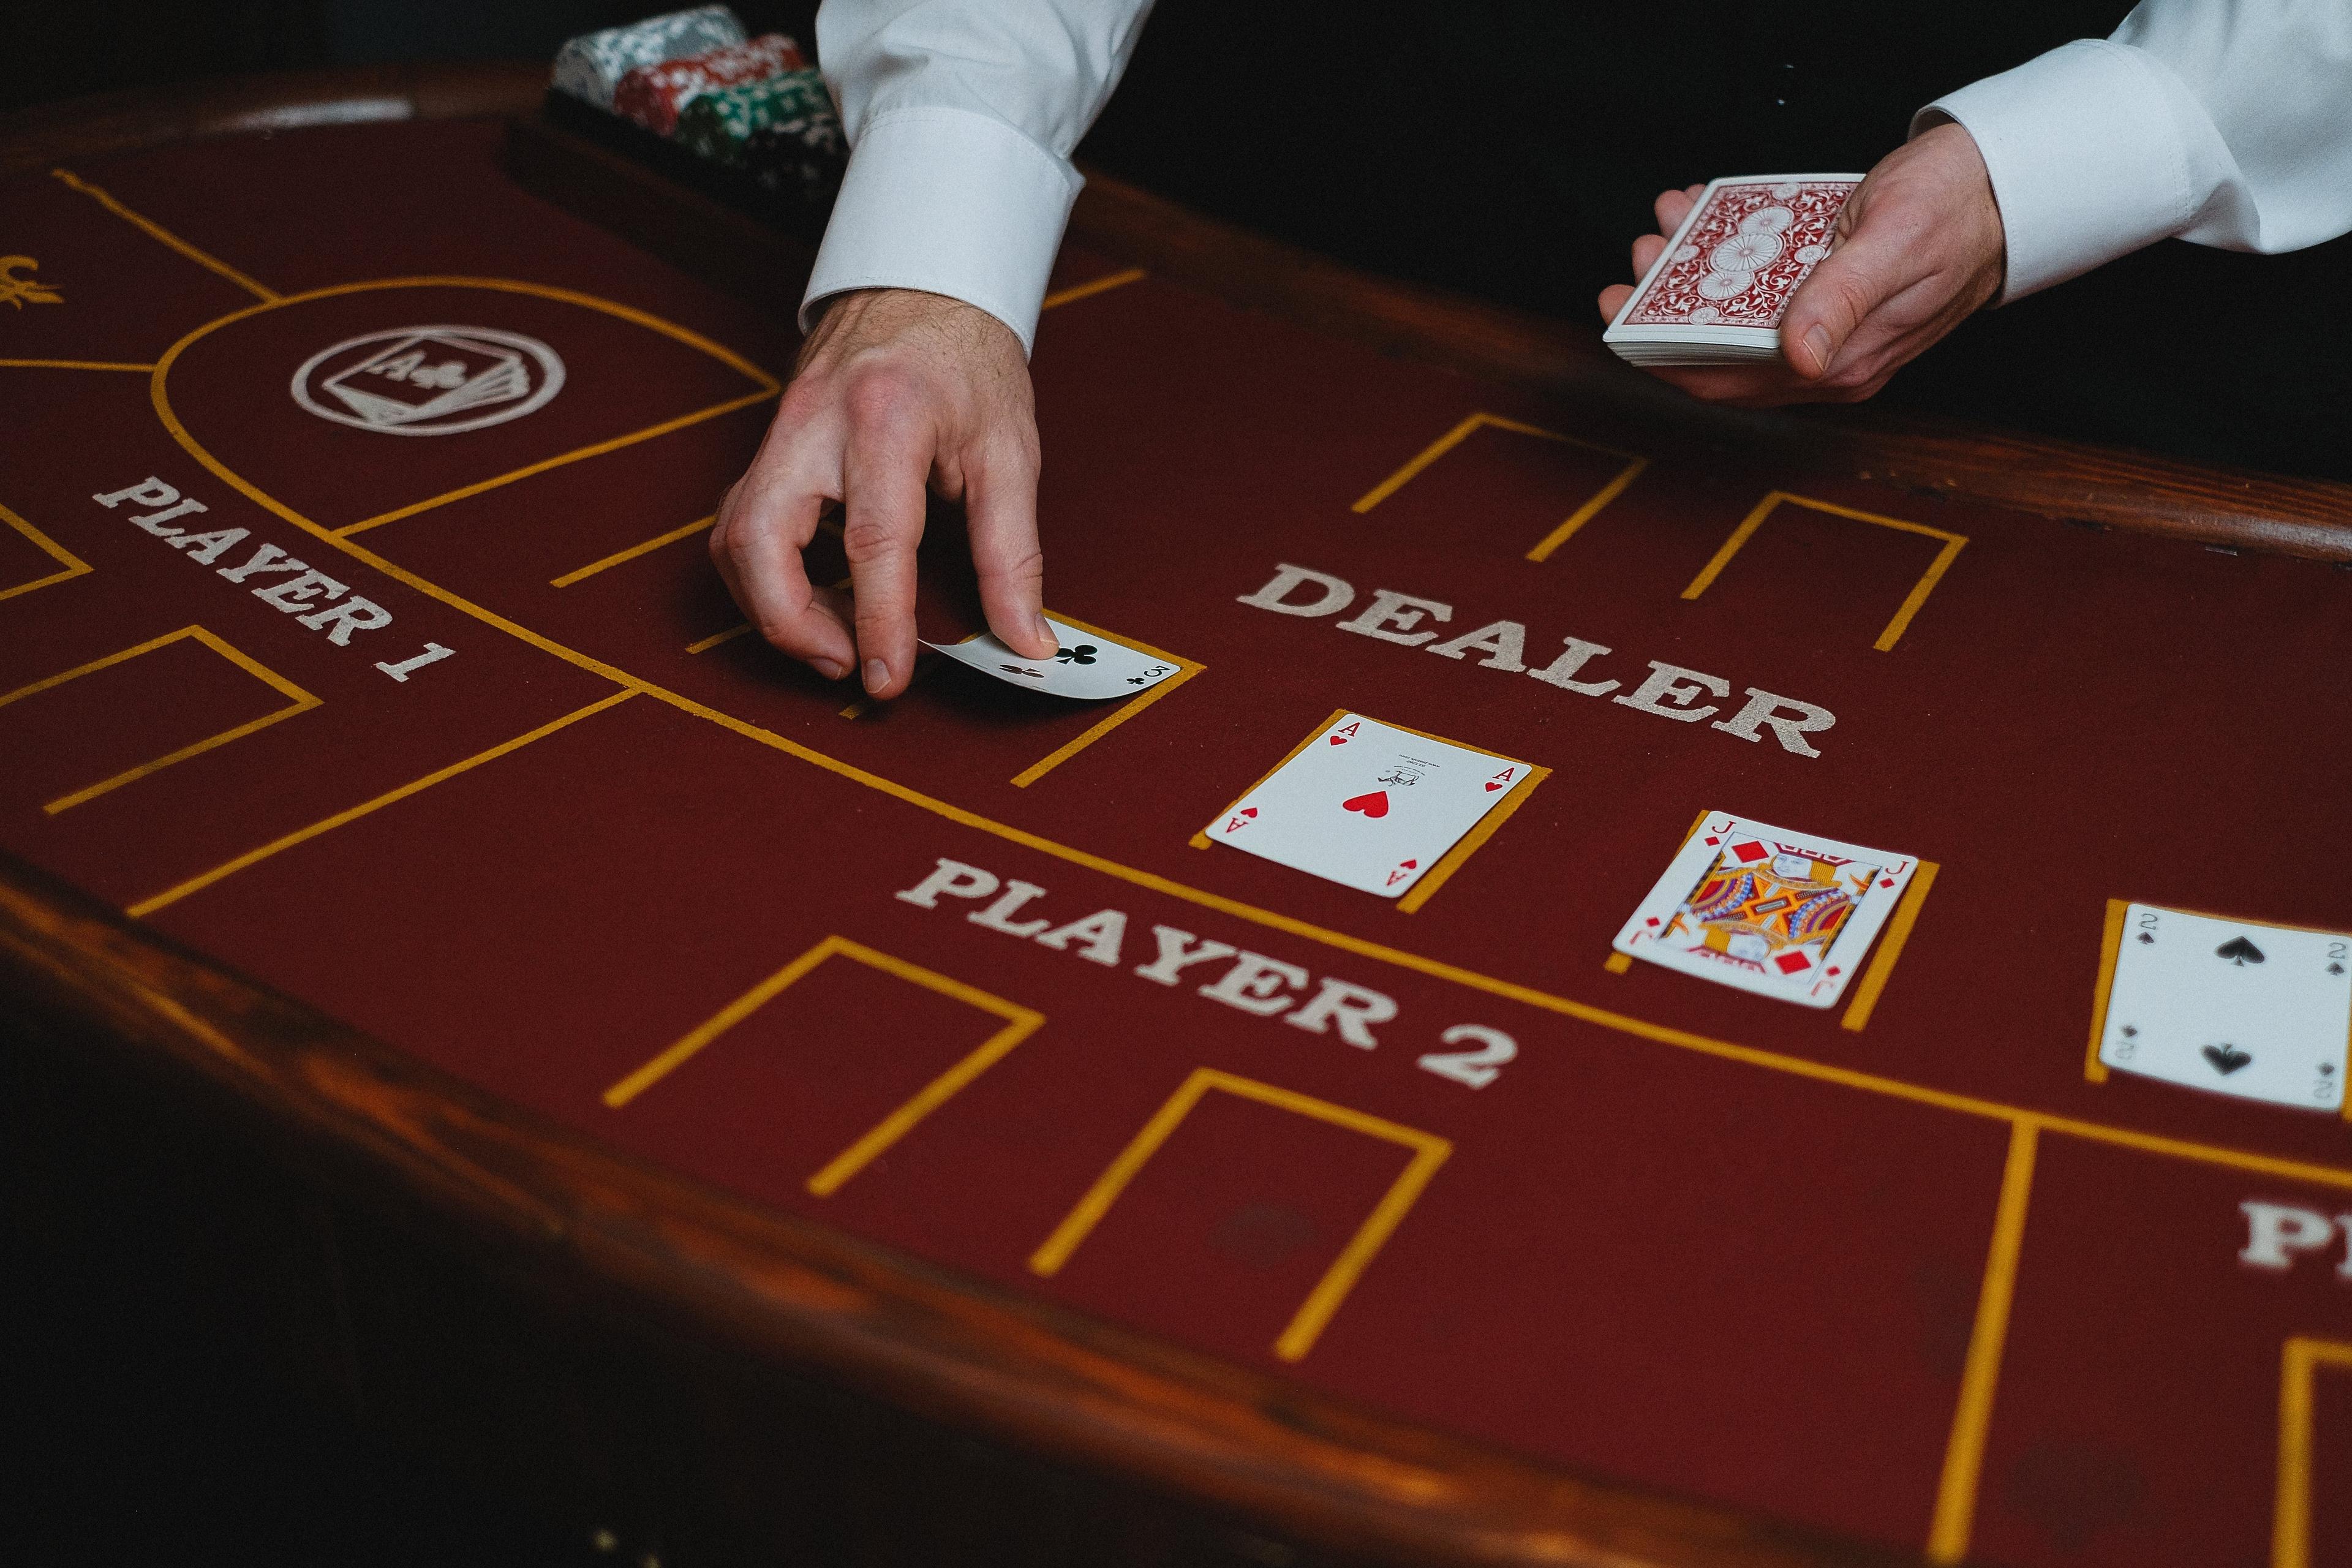 Blackjack basics and tips: how to get started